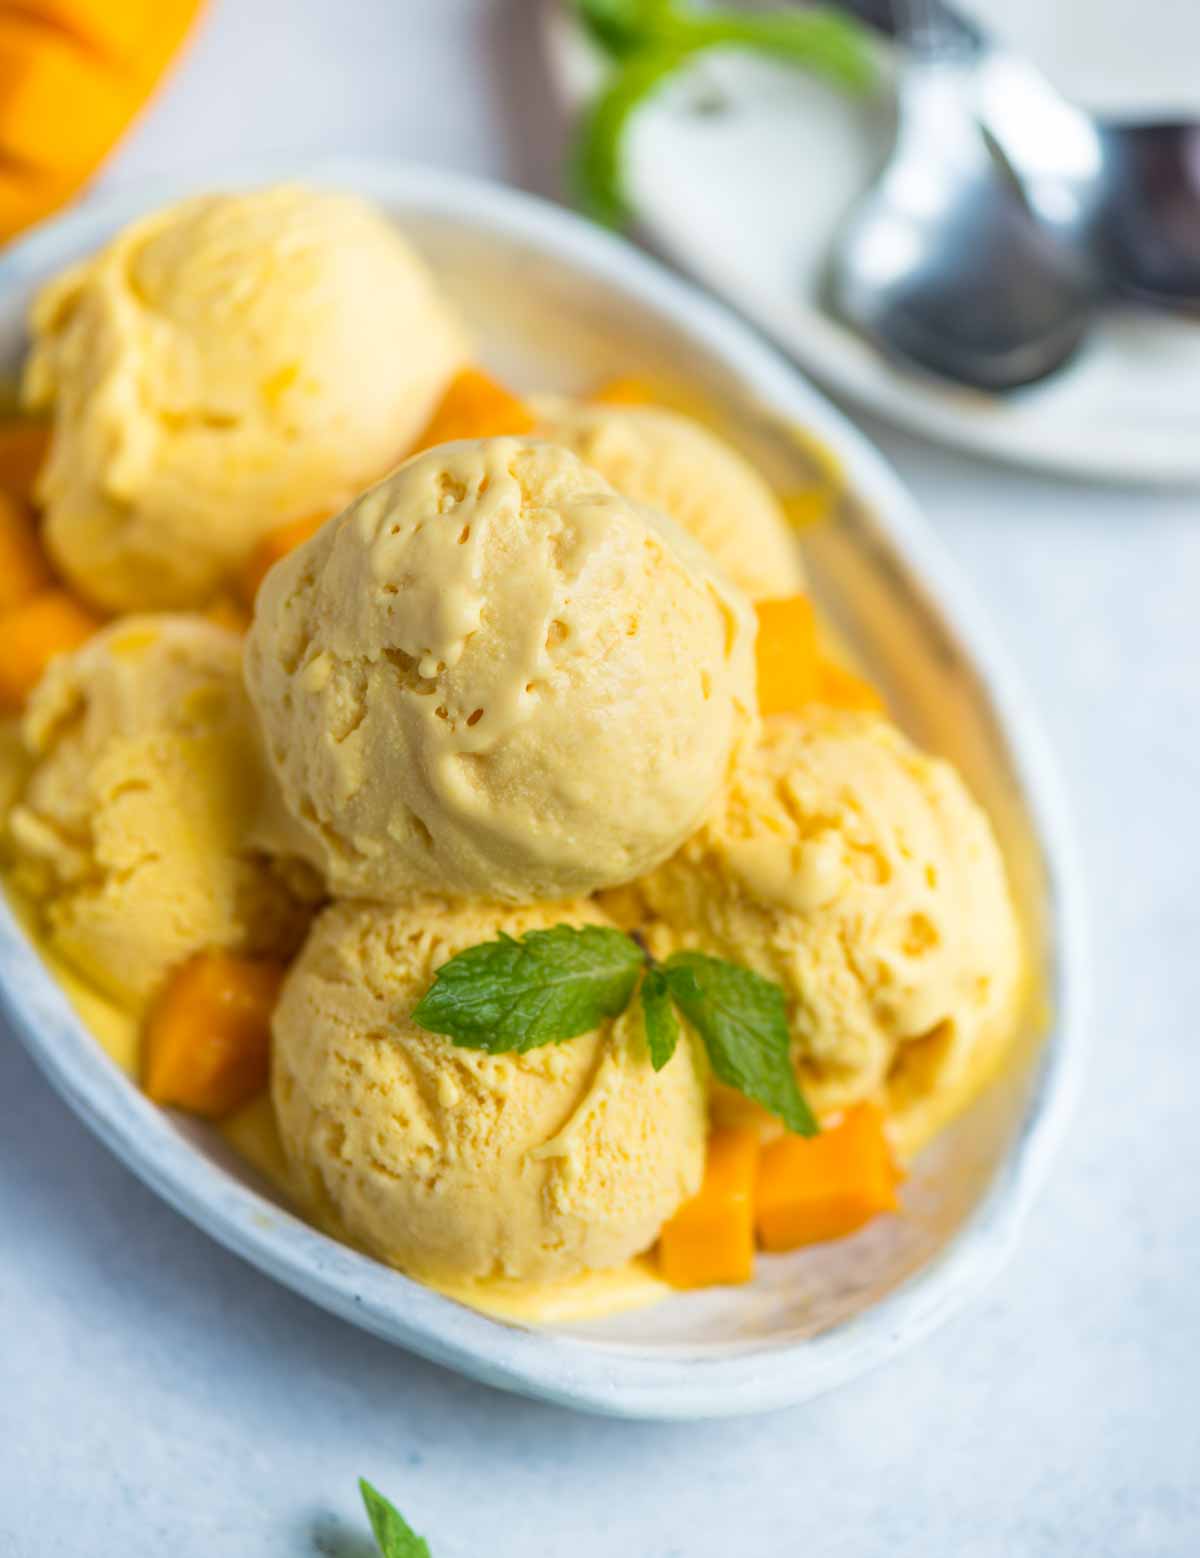 Mango Ice Cream is creamy and tastes better than a tub of store brought Ice cream. There is no artificial colour or flavour and you don't even need an Ice cream maker to make it. 